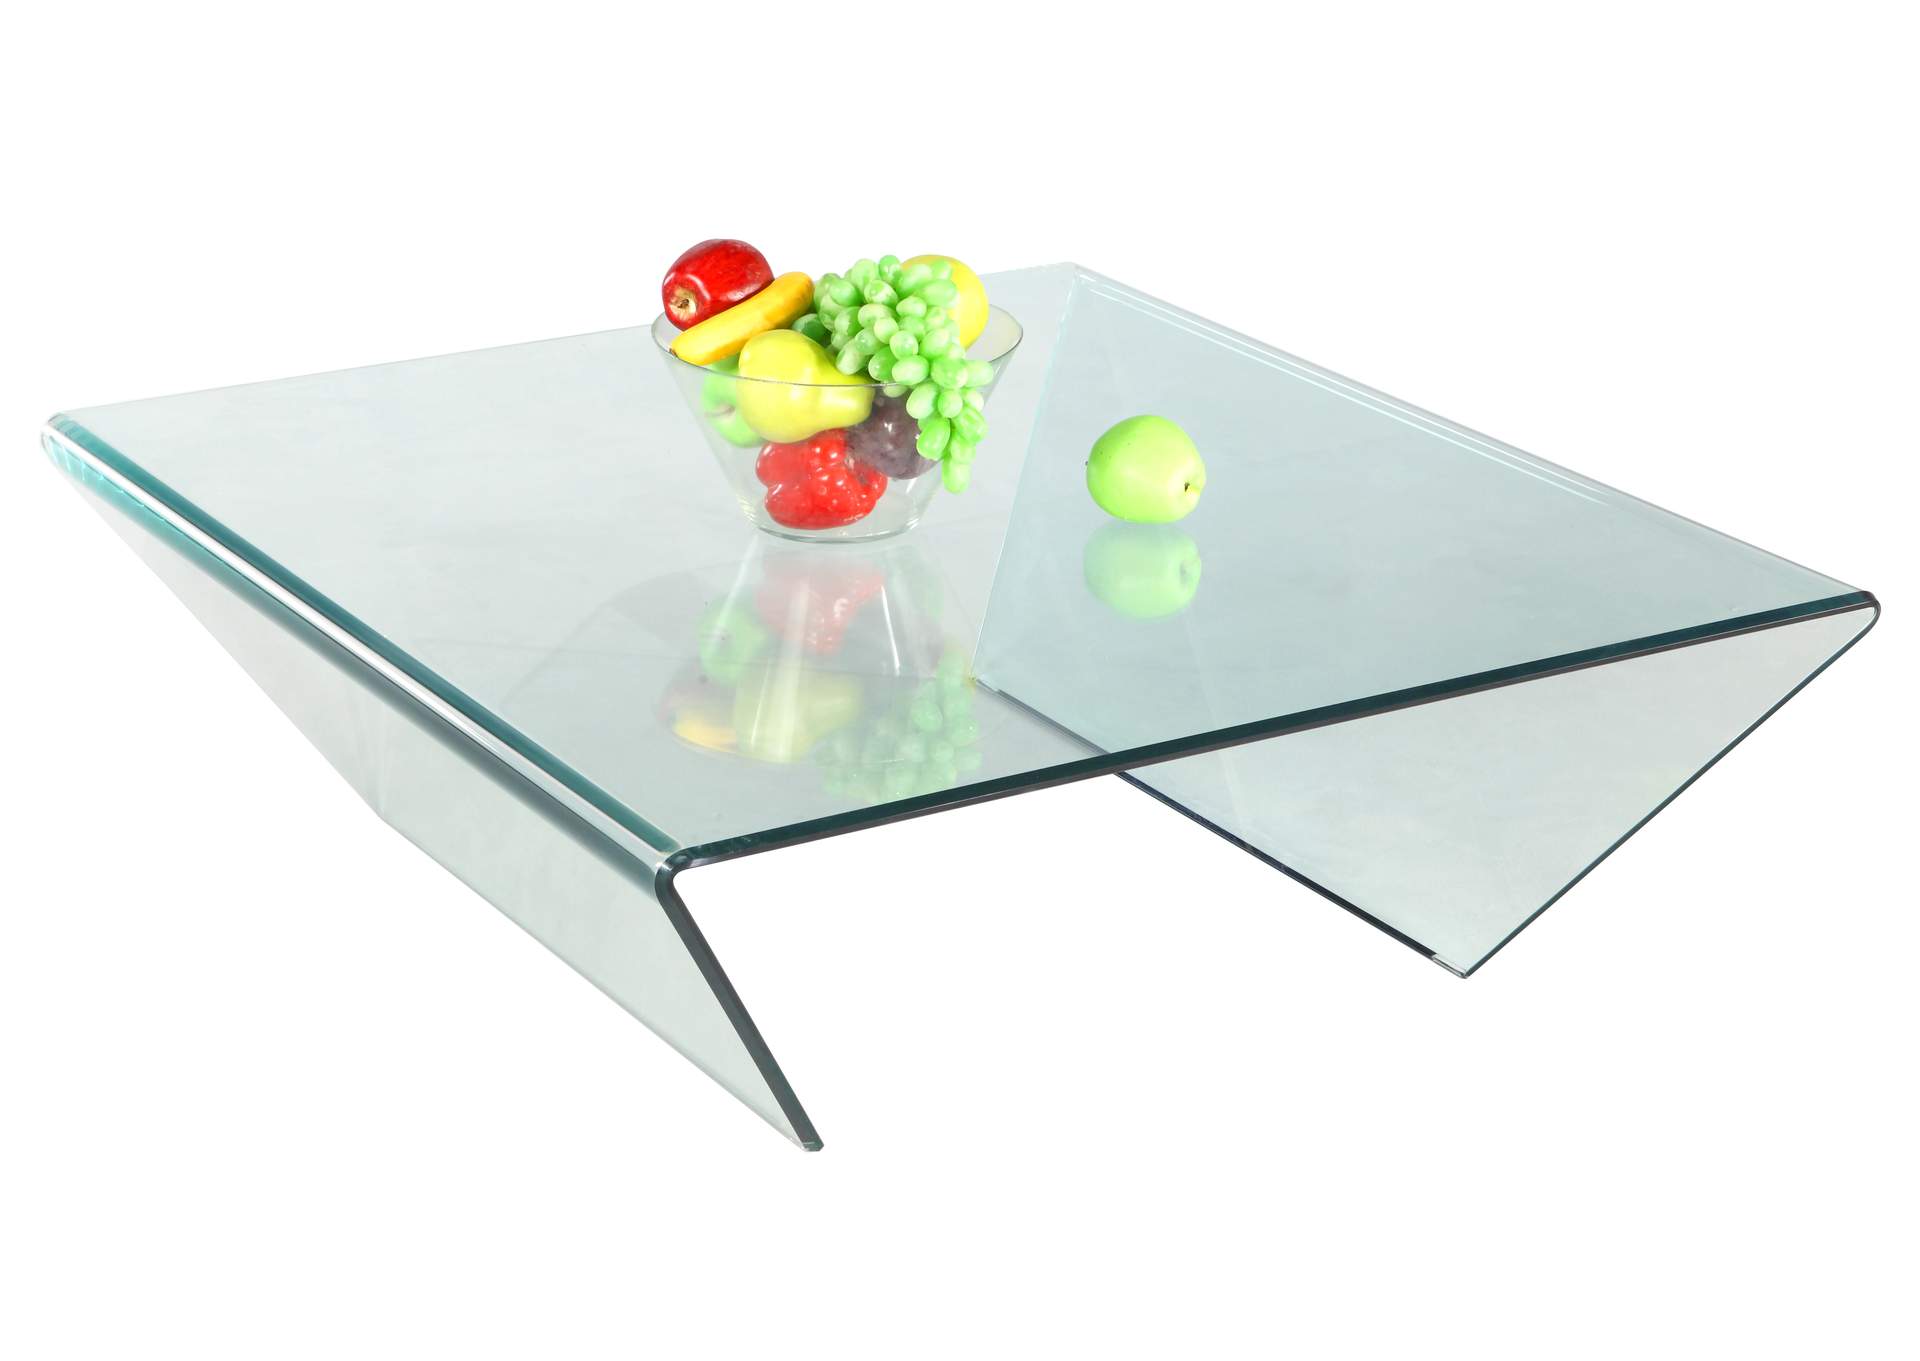 39" x 41" Square Bent Glass Cocktail Table,Chintaly Imports